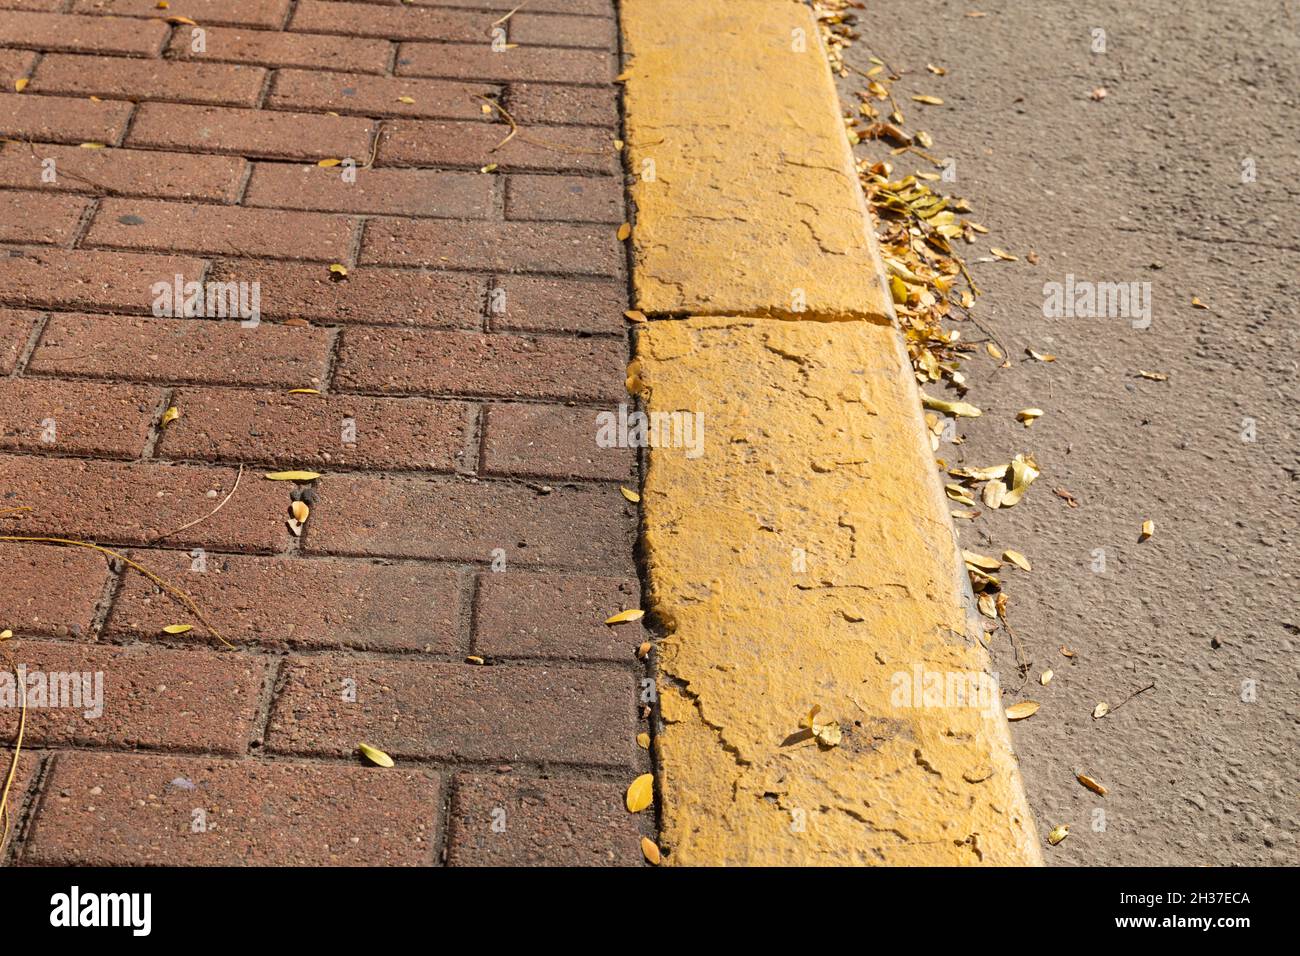 Red brick sidewalk edged in concrete curb painted bright yellow, muddy asphalt road bed, horizontal aspect Stock Photo